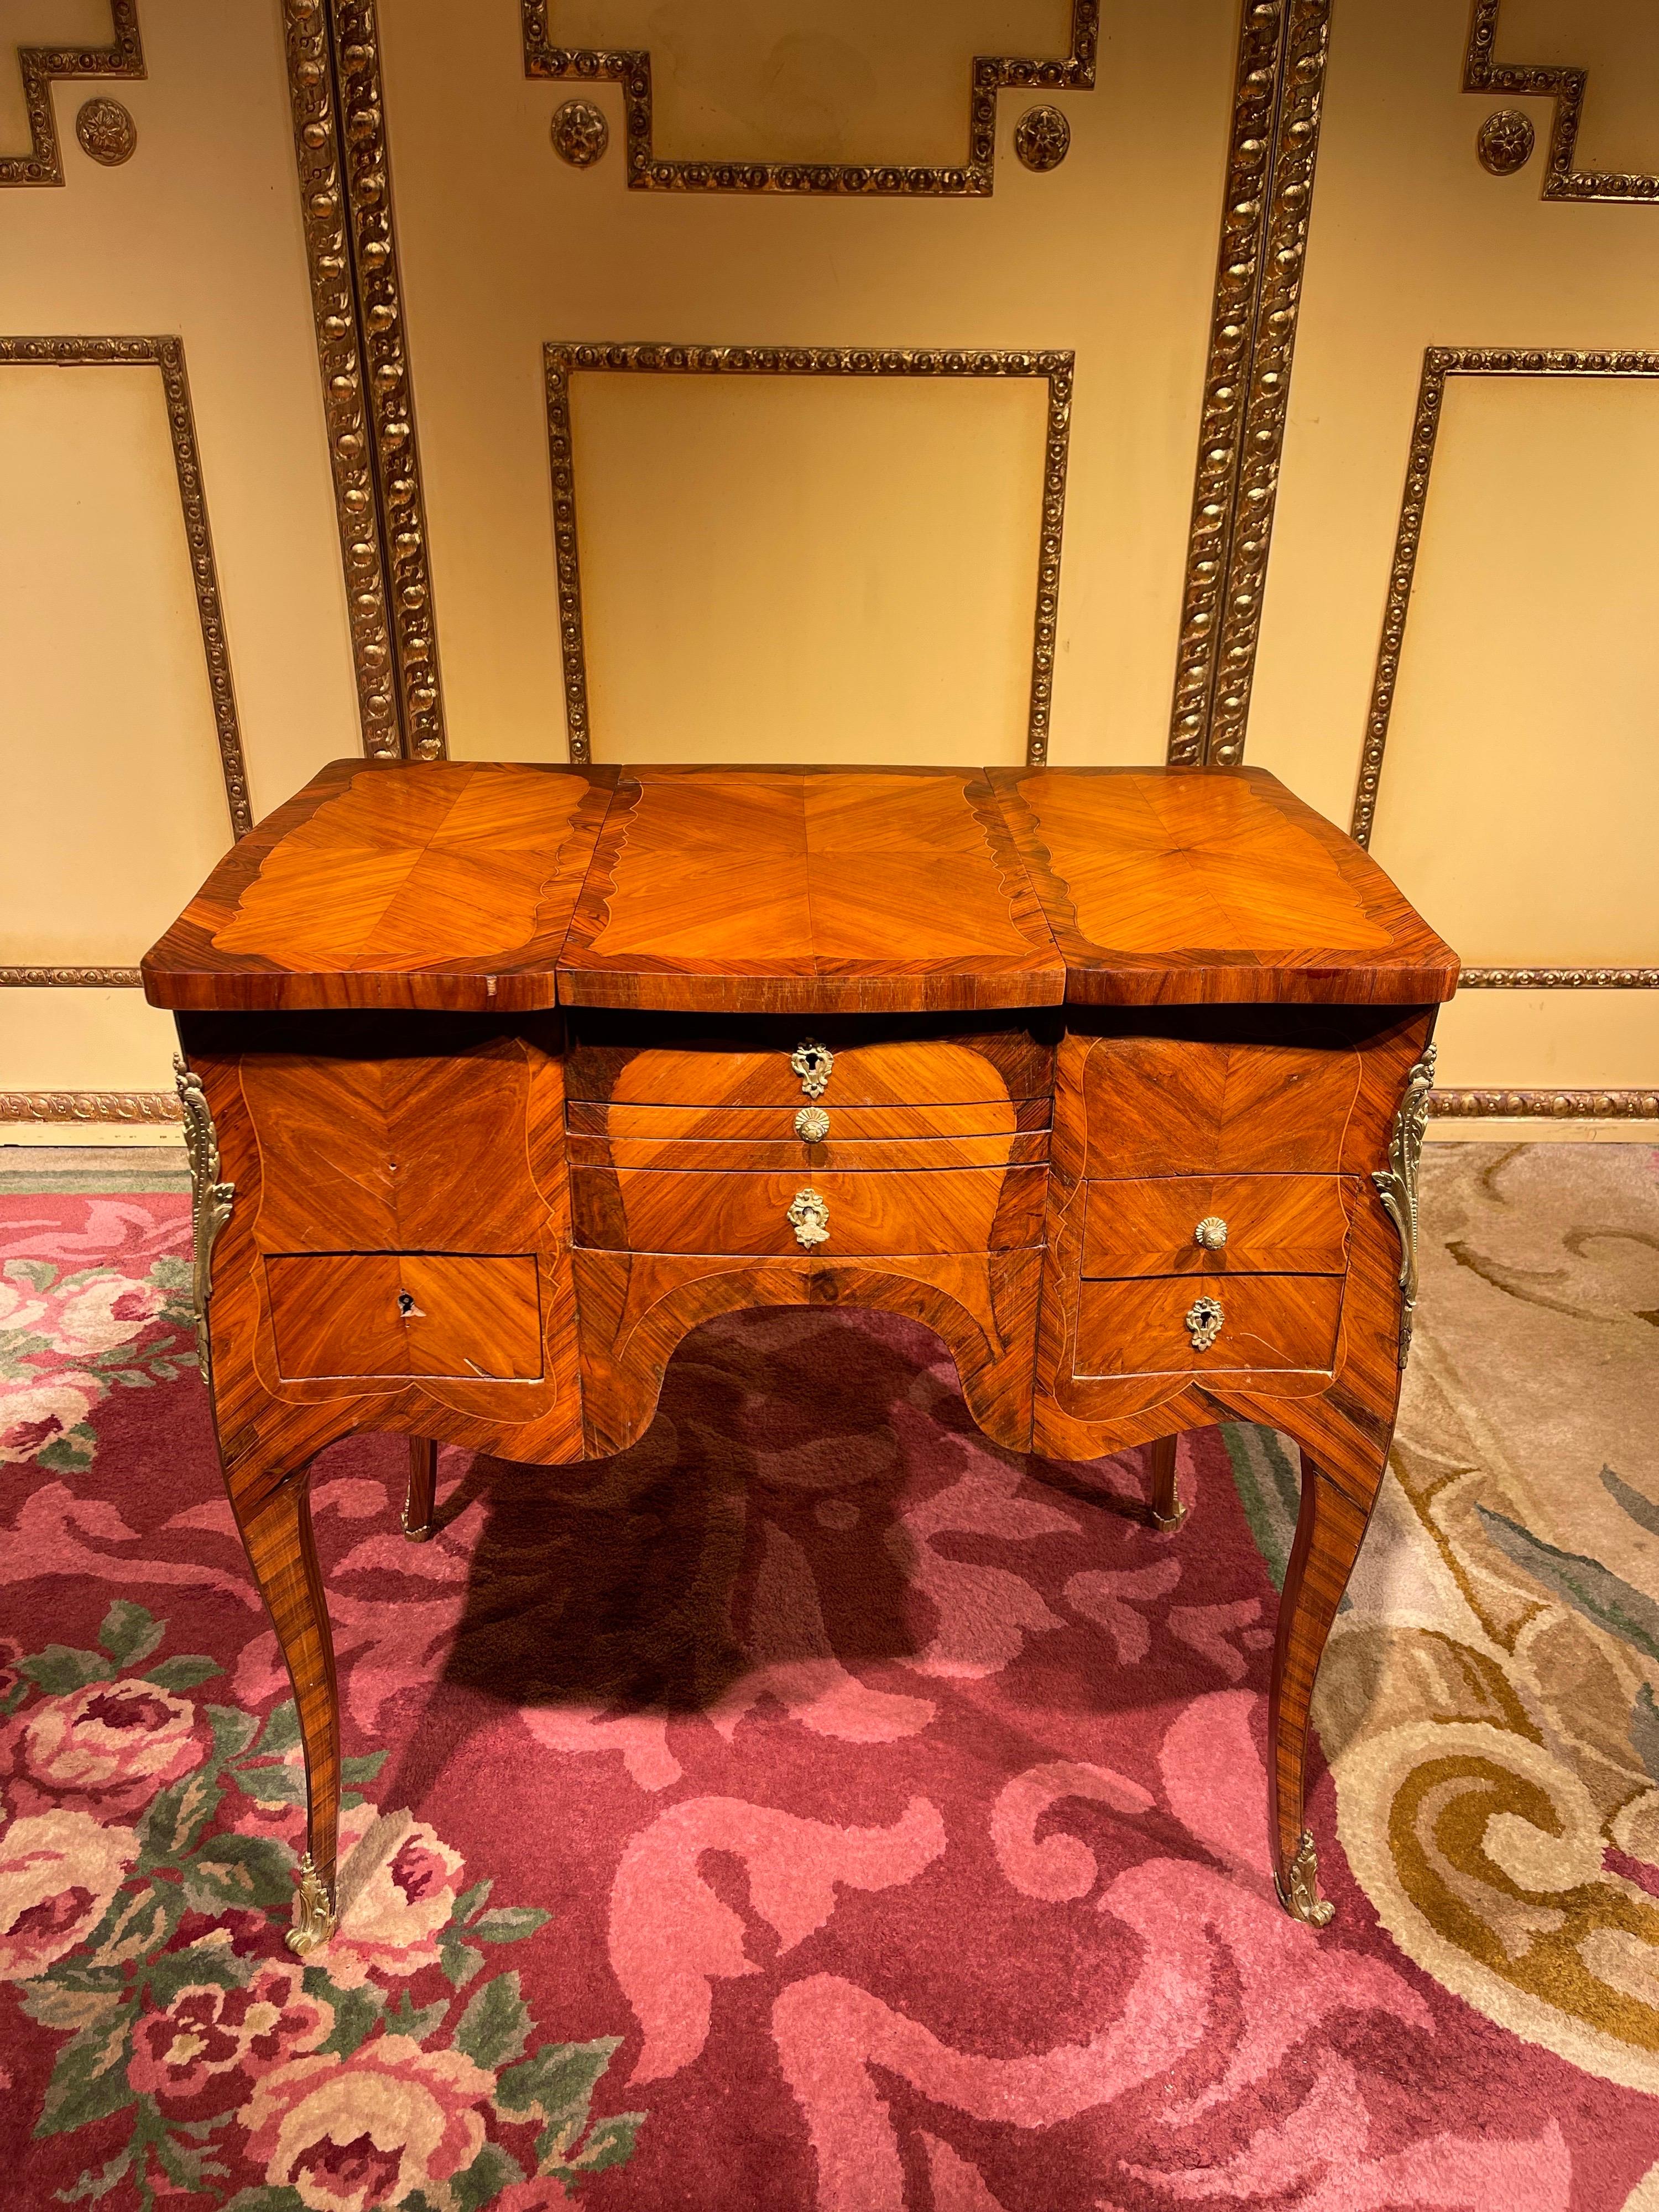 Fine wood veneer with thread inlays and decorative brass fittings. Curved cover plate with hinged middle part, inside with mirror. Four-drawer body with sideboard, on graceful, curved legs. Brass key covers and handles. Locks with keys available.